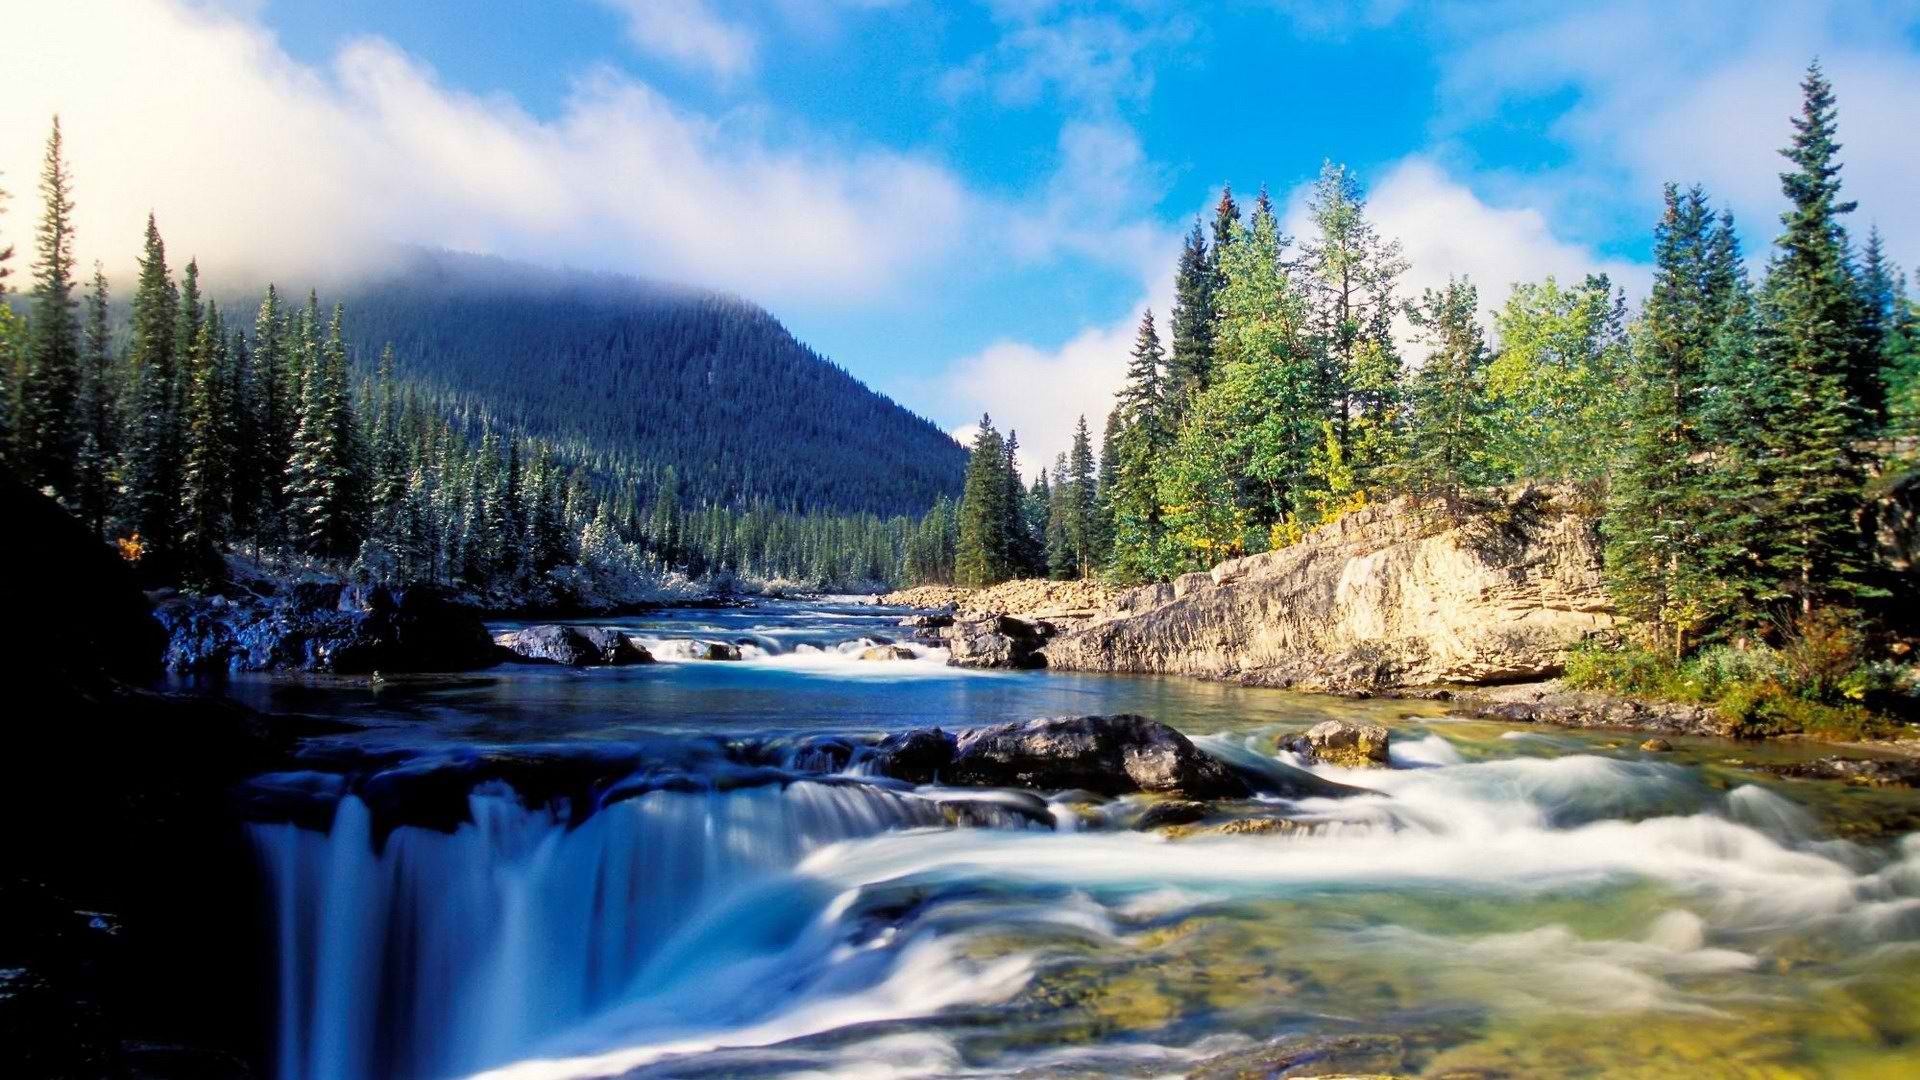 433 Canada HD Wallpapers [1920x1080]